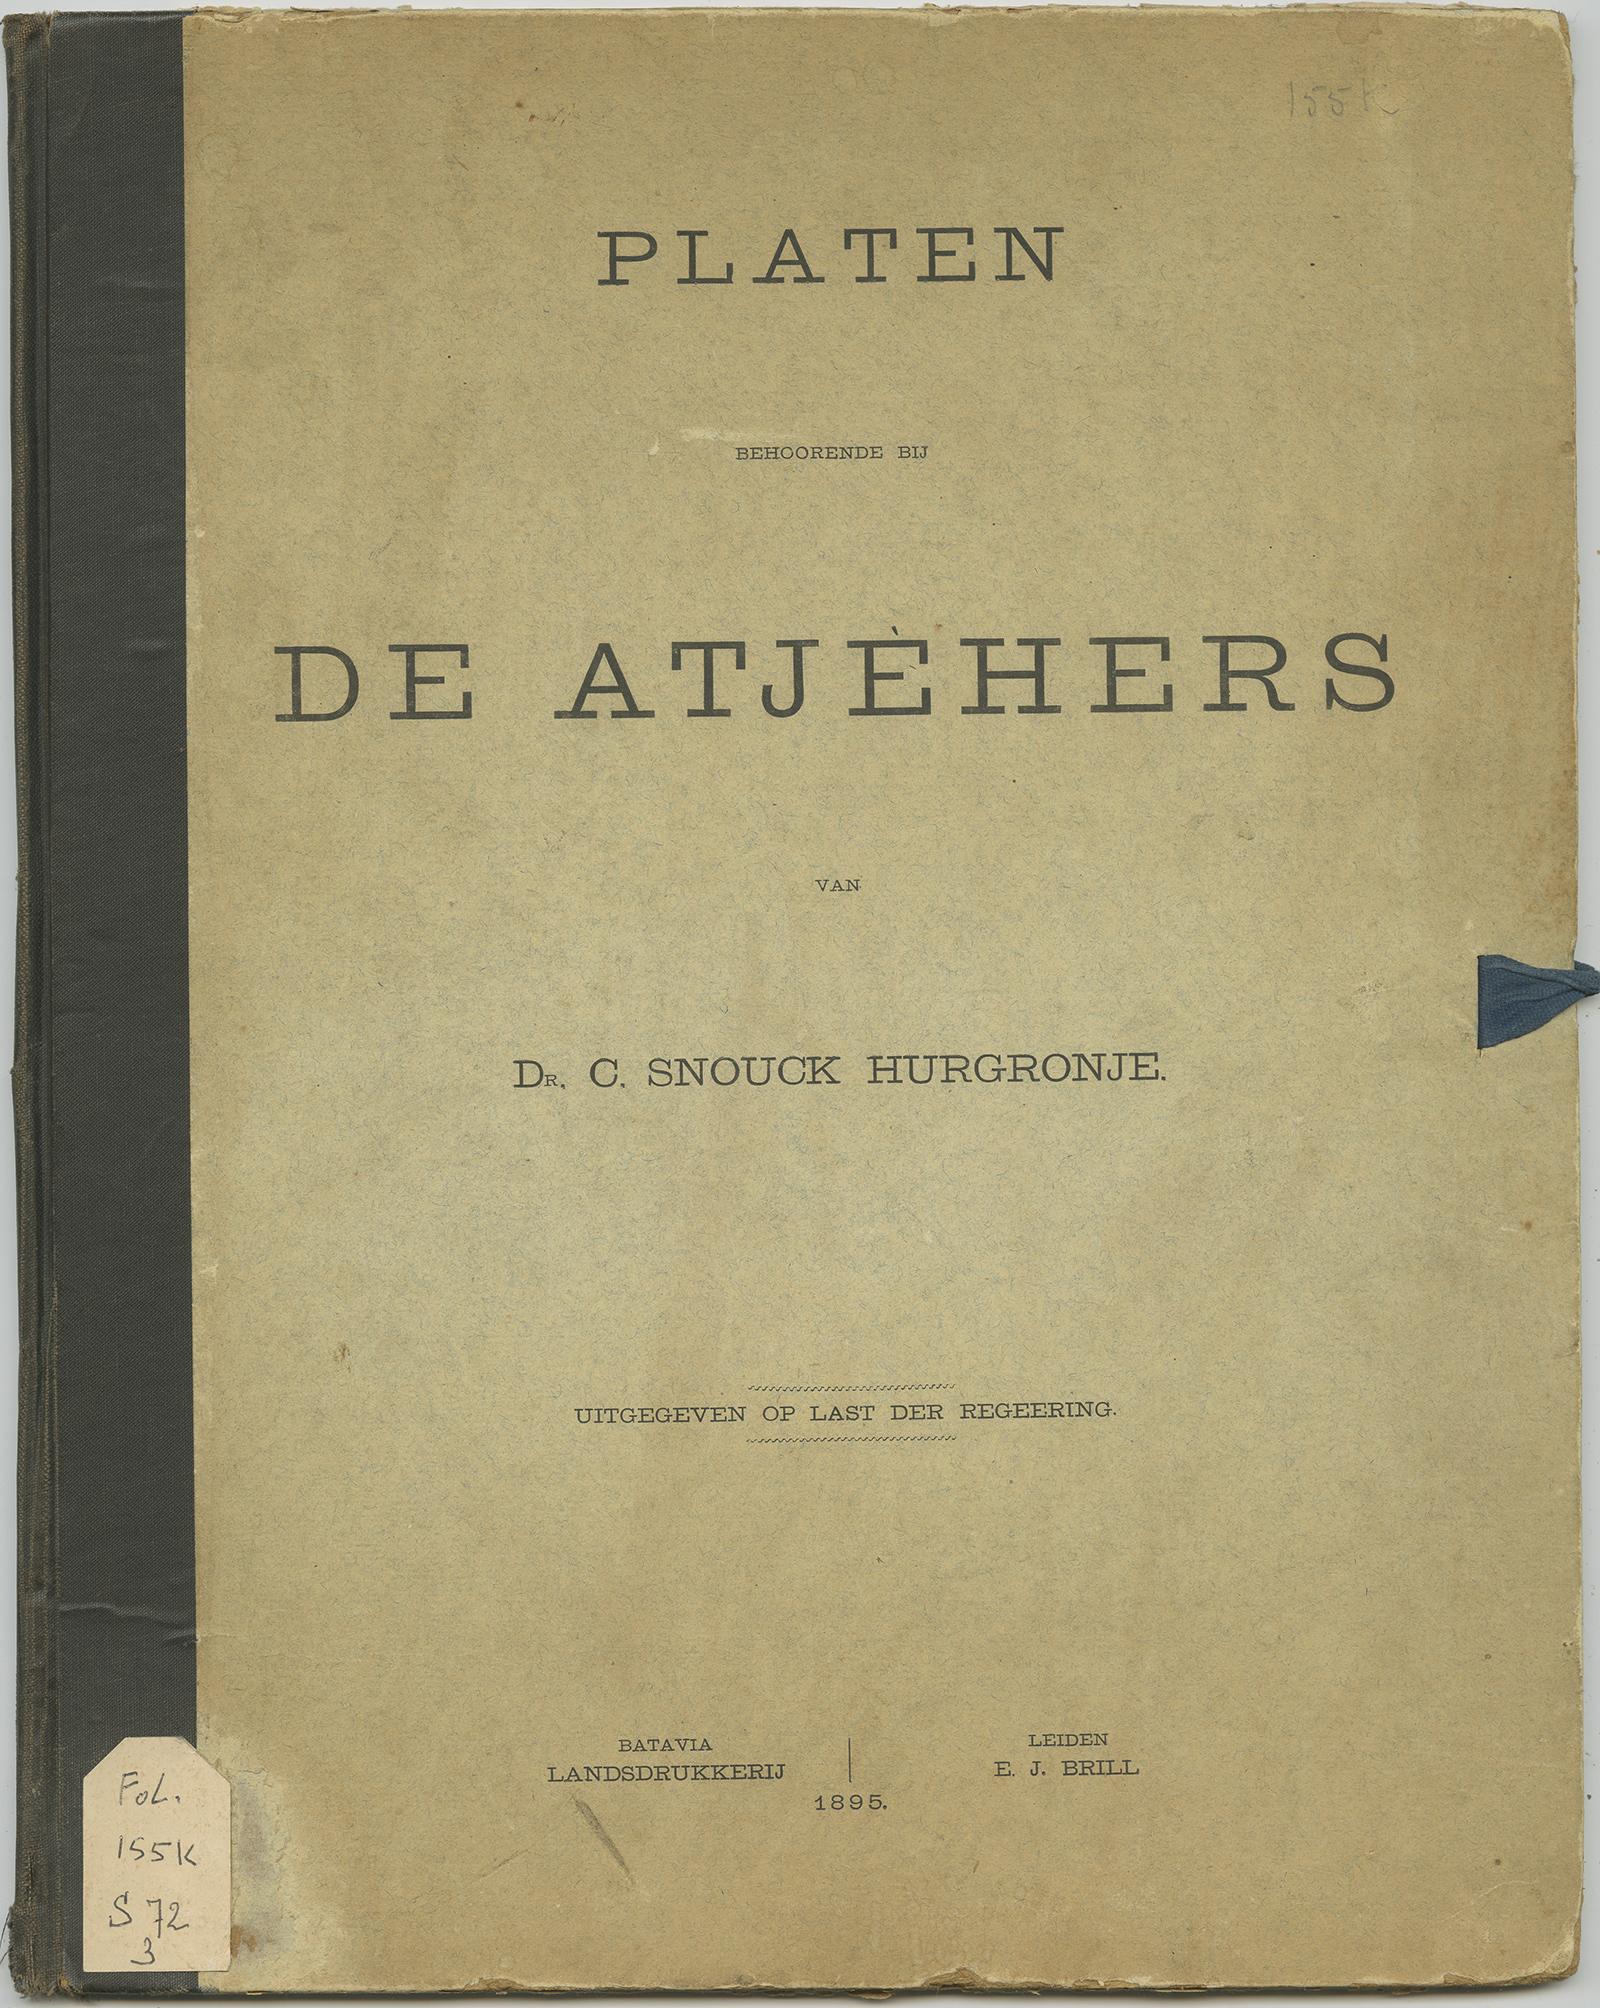 Cardboard cover titled 'Platen behoorende bij De Atjèhers van Dr. C. Snouck Hurgronje' including 12 plates of Aceh (or Atjeh, Indonesia) with a total of 27 images. The plates include images of a mosque on Aceh, costumes of Aceh, plow with buffalo,